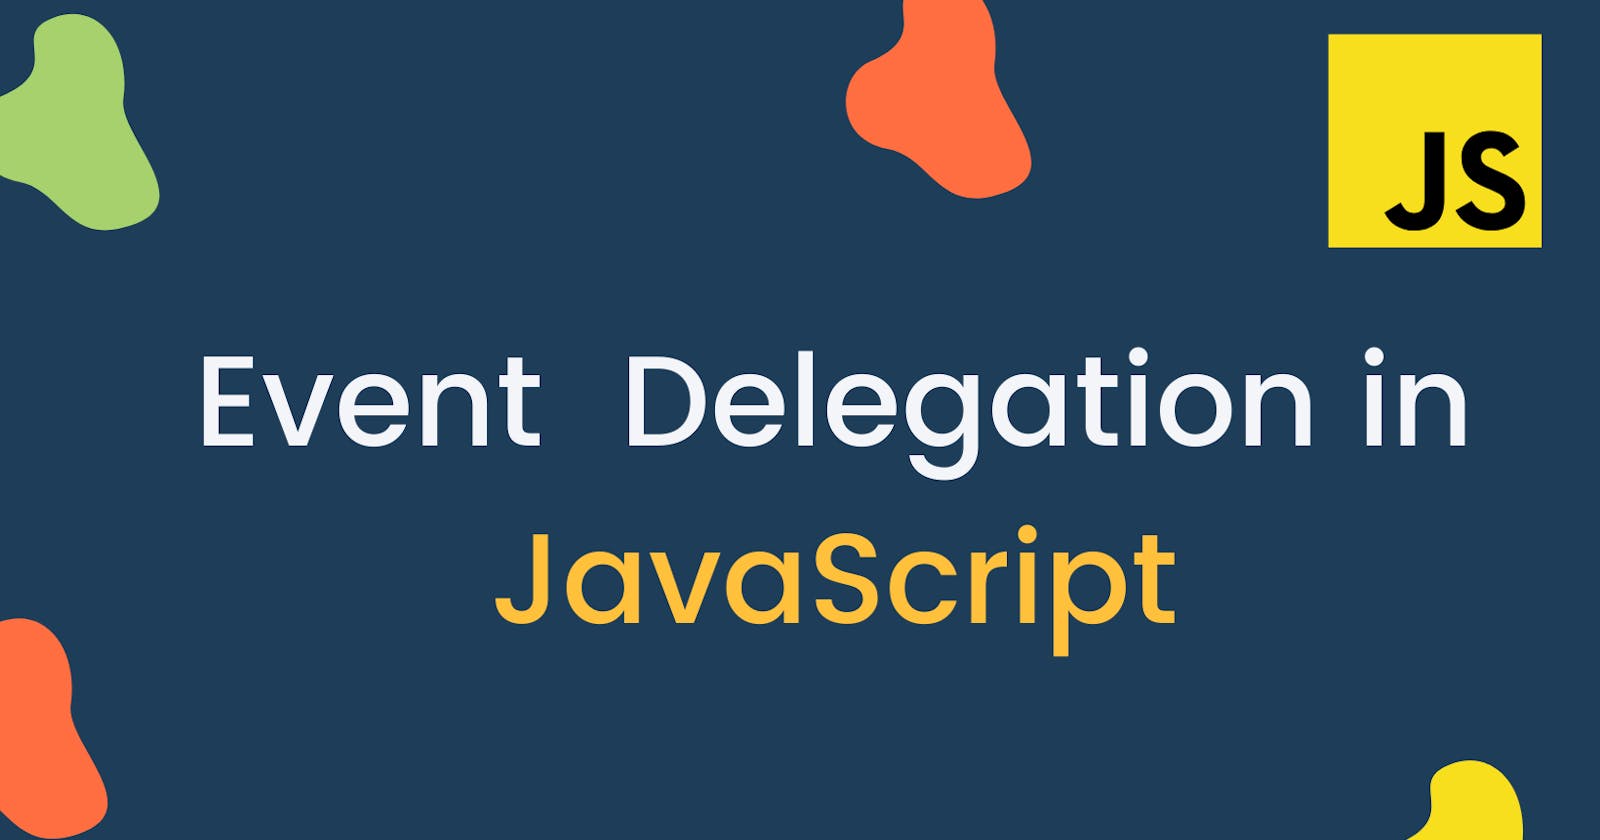 Learn Event Delegation in JavaScript